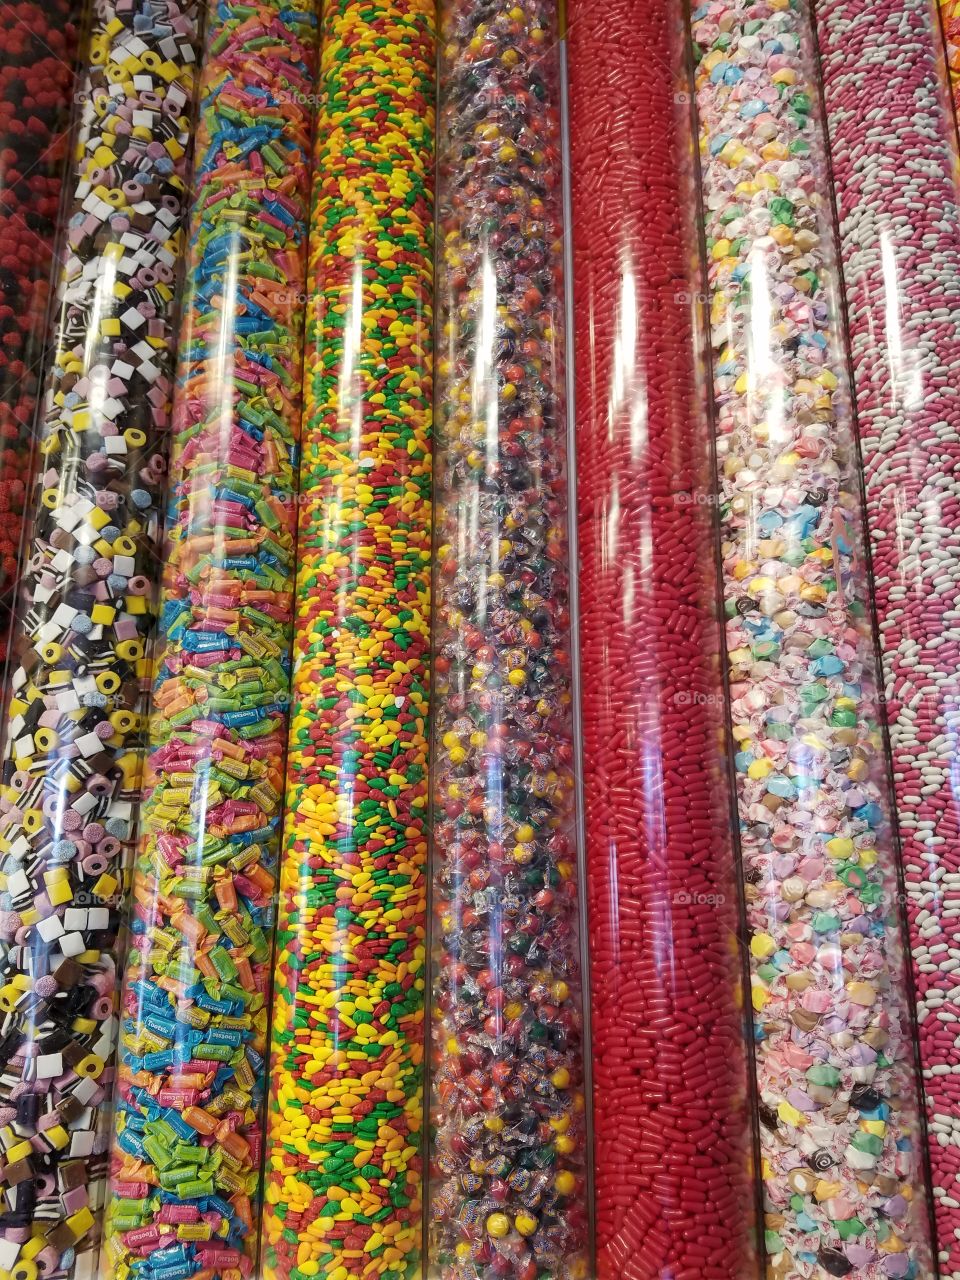 Candy tubes